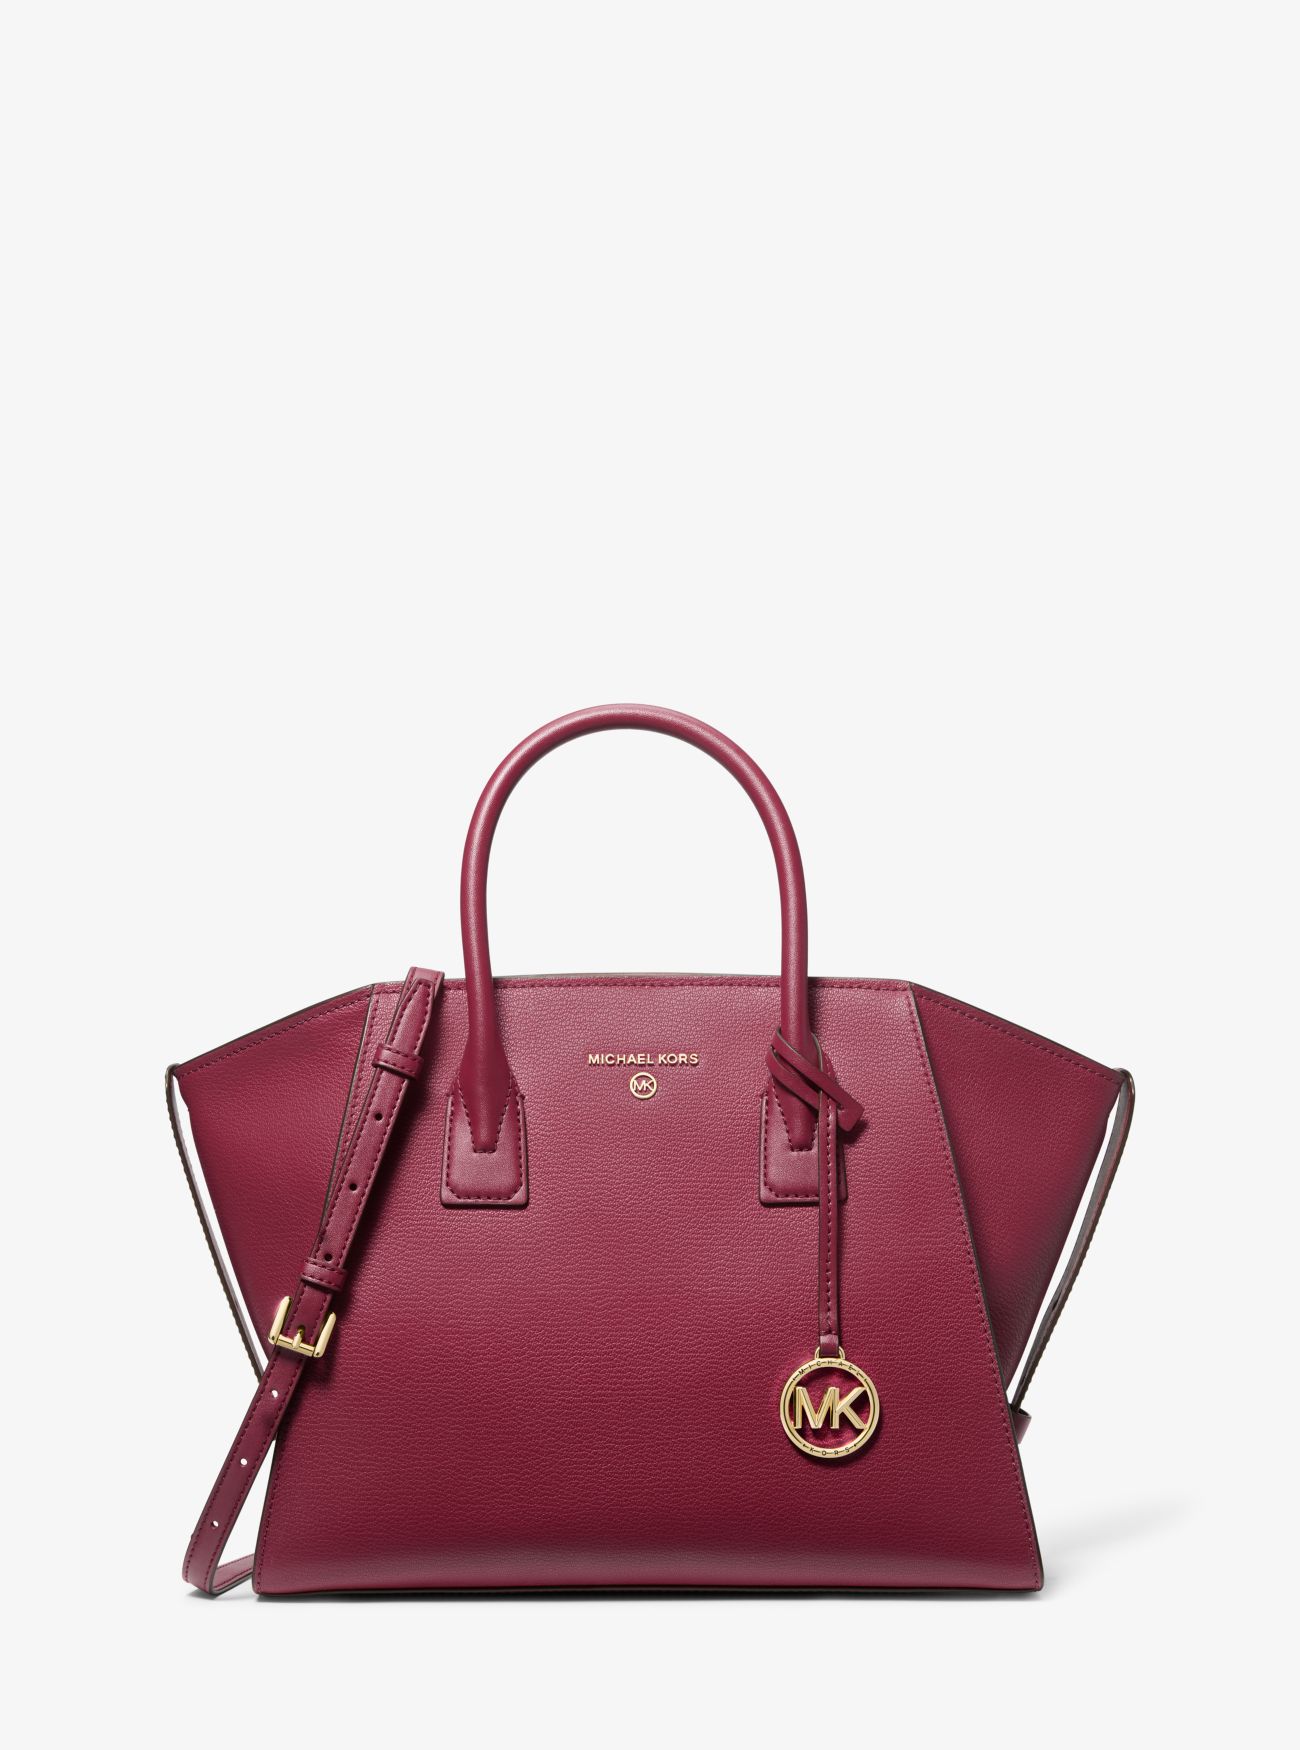 MK Avril Large Leather Top-Zip Satchel - Mulberry - Michael Kors